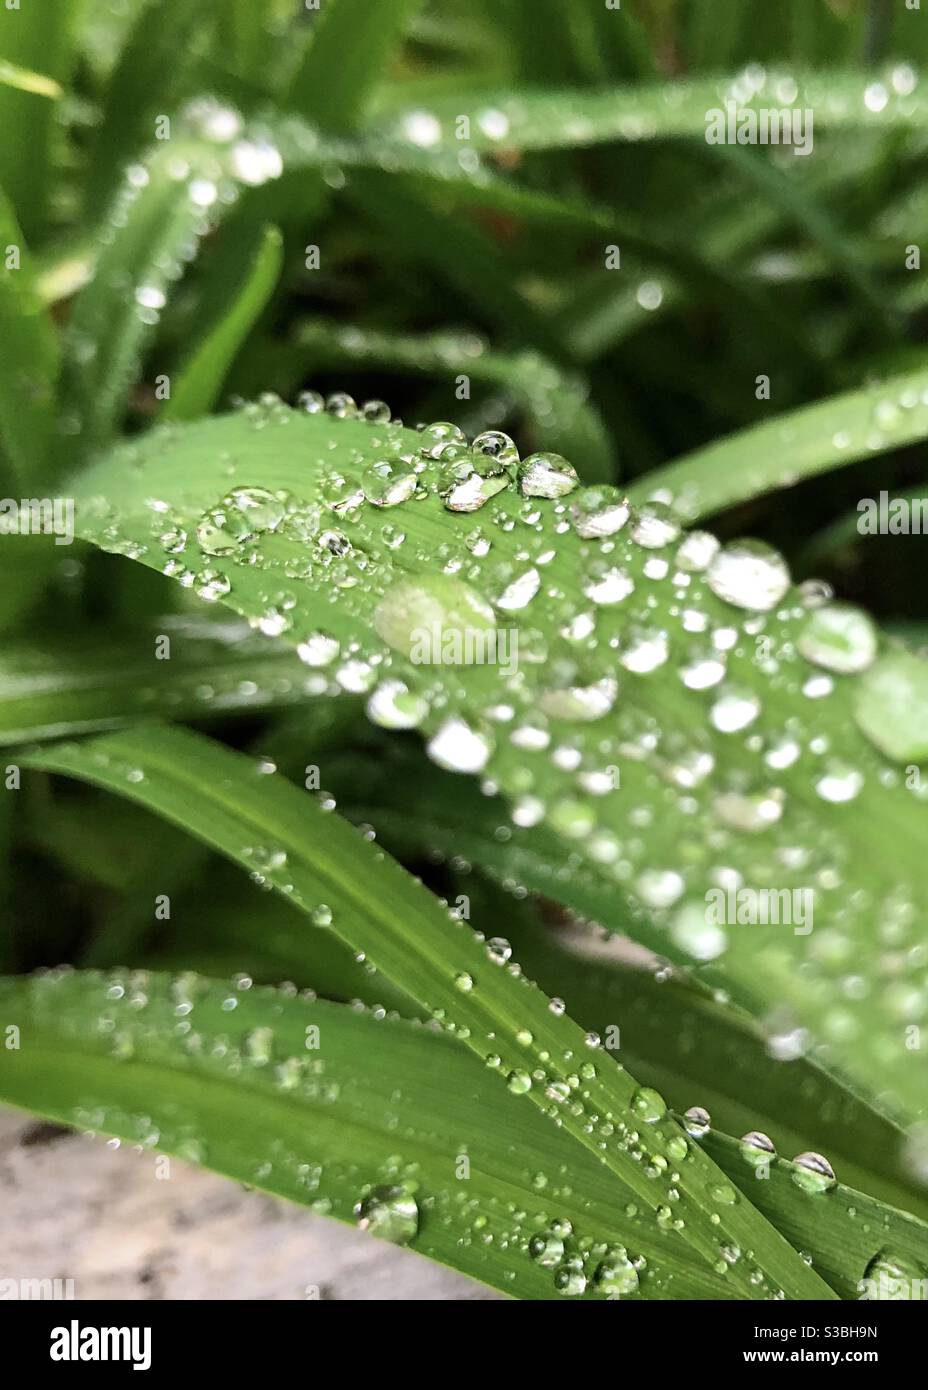 Macro shot of water drops on fresh green blades of grass Stock Photo